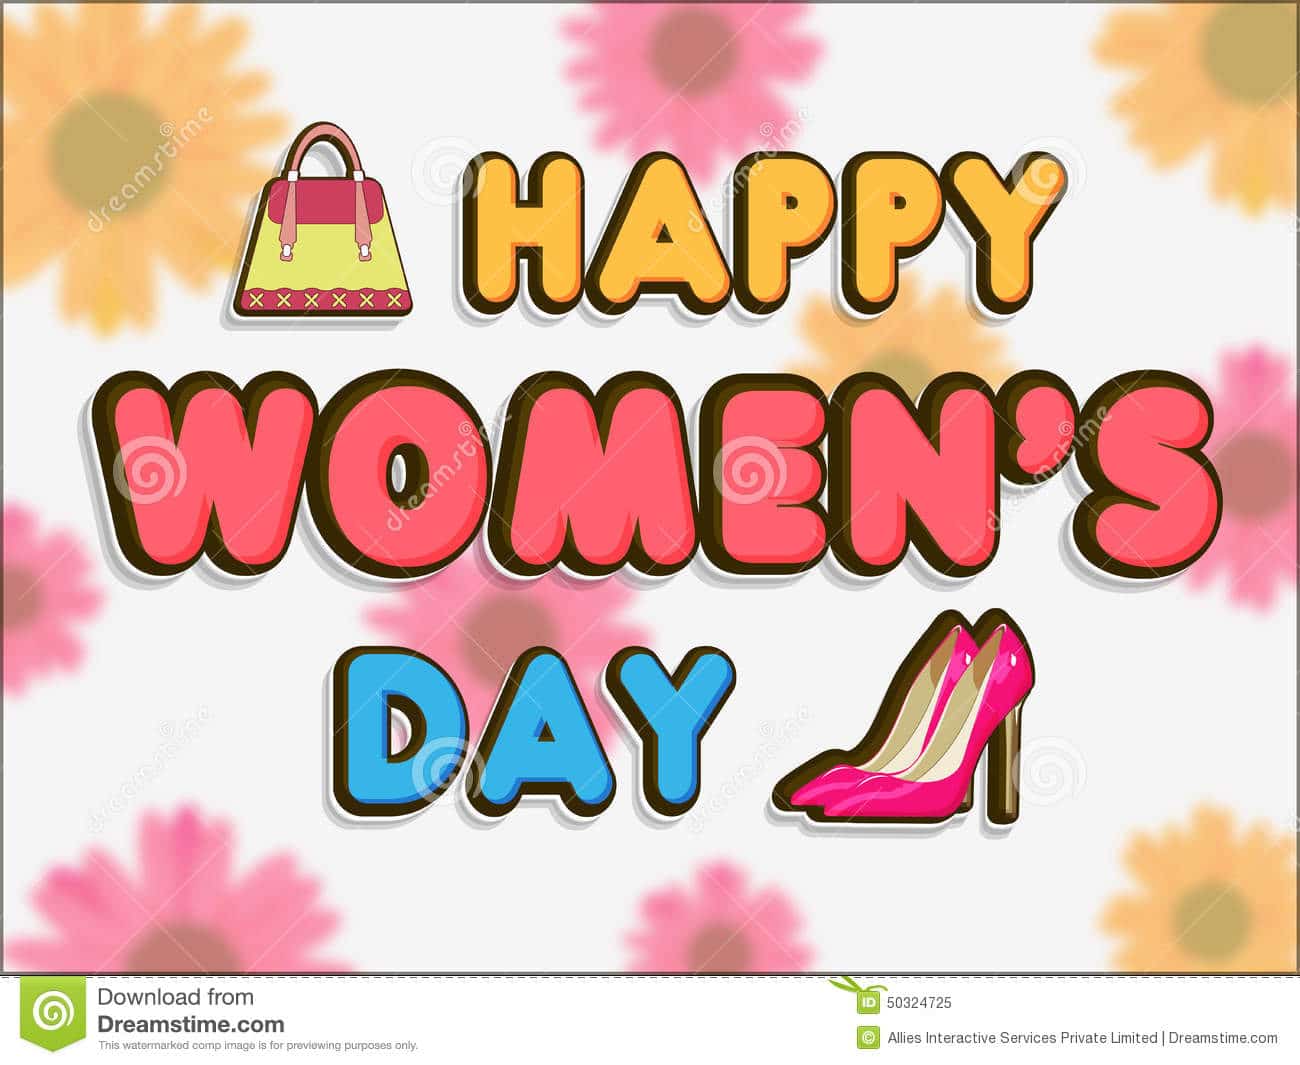 Happy Women’s Day HD Images Poster